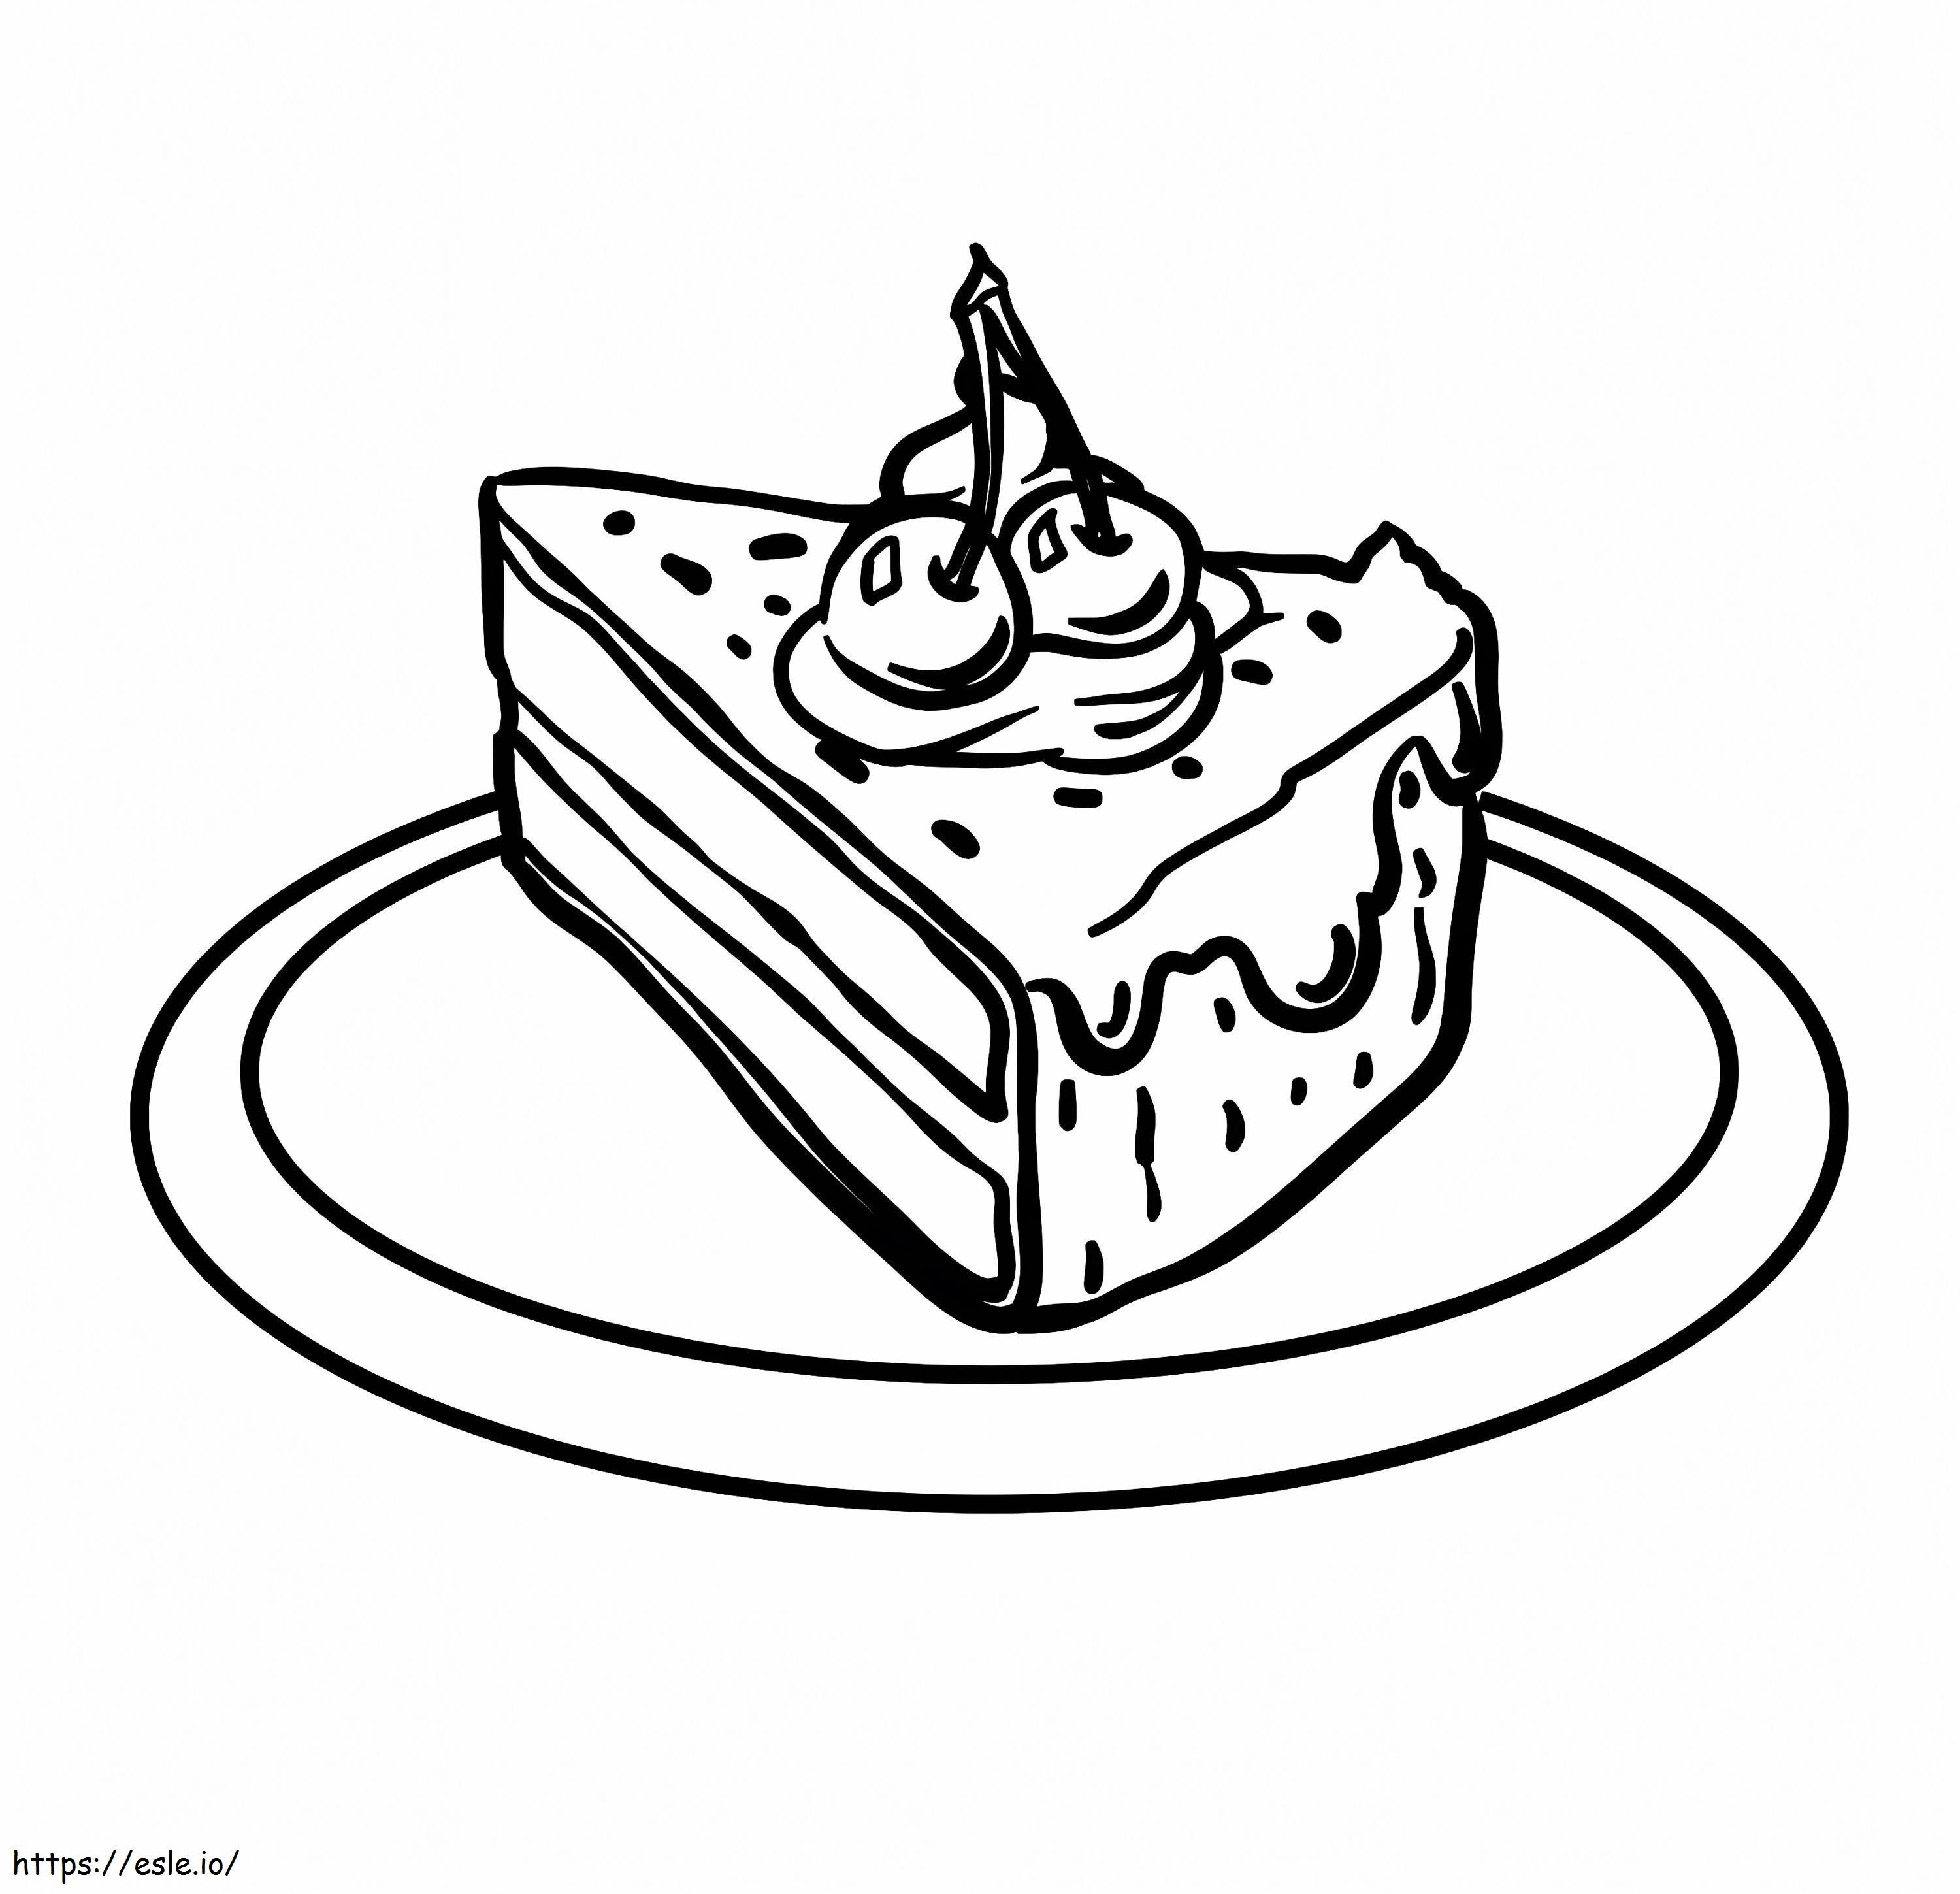 Small Piece Of Cake coloring page